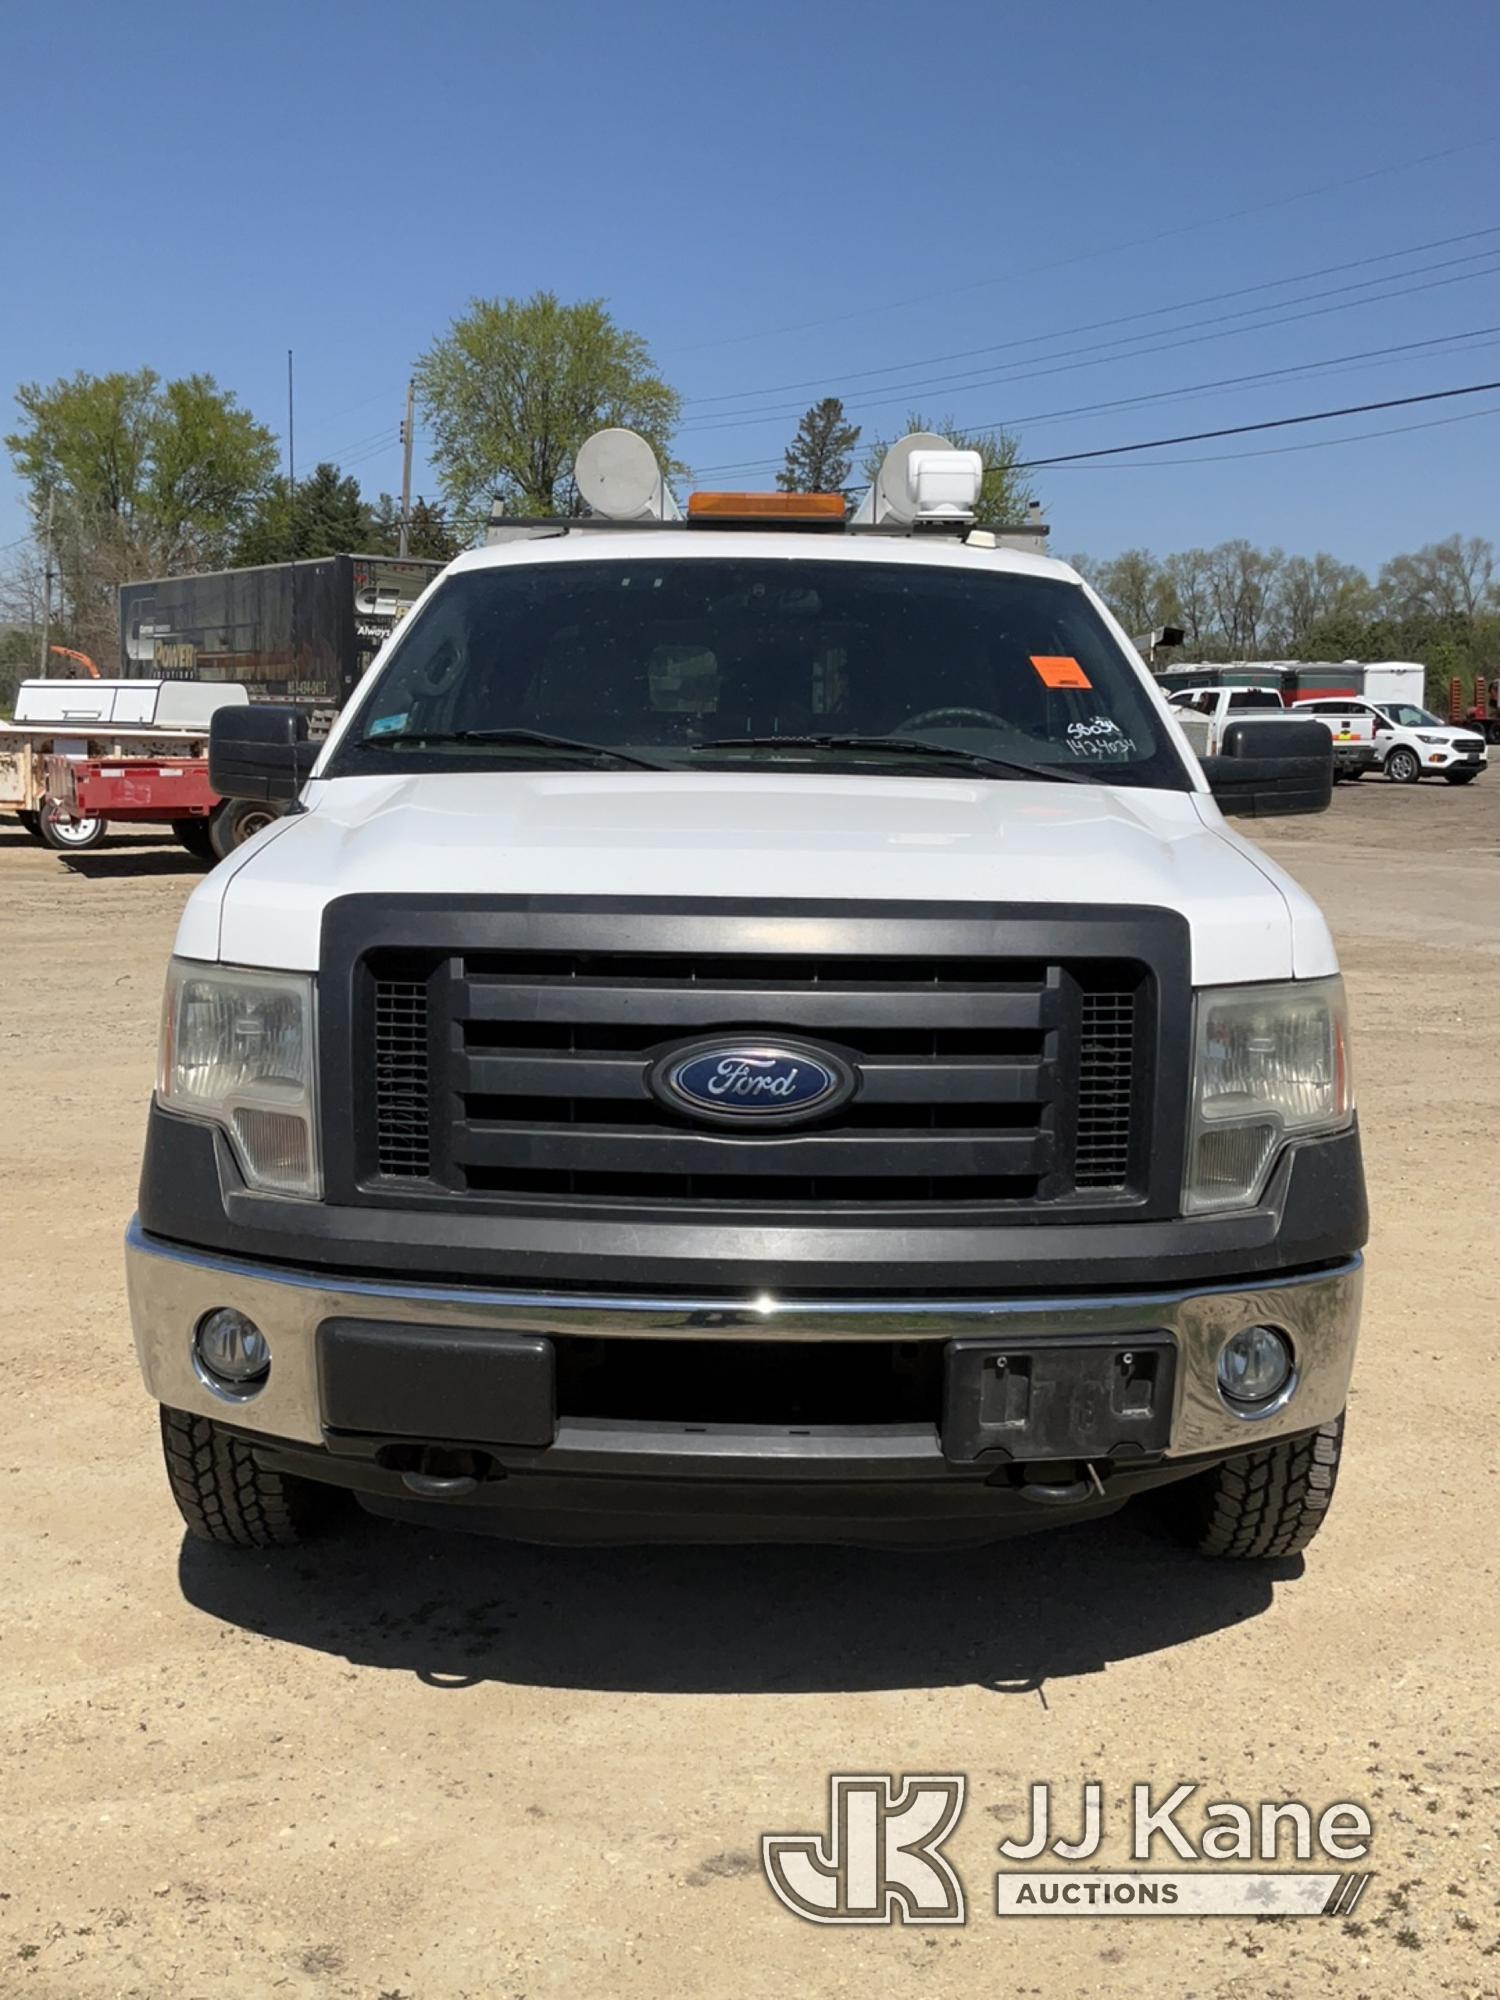 (South Beloit, IL) 2012 Ford F150 4x4 Extended-Cab Pickup Truck Runs & Moves) (ABS Light On, Brake L